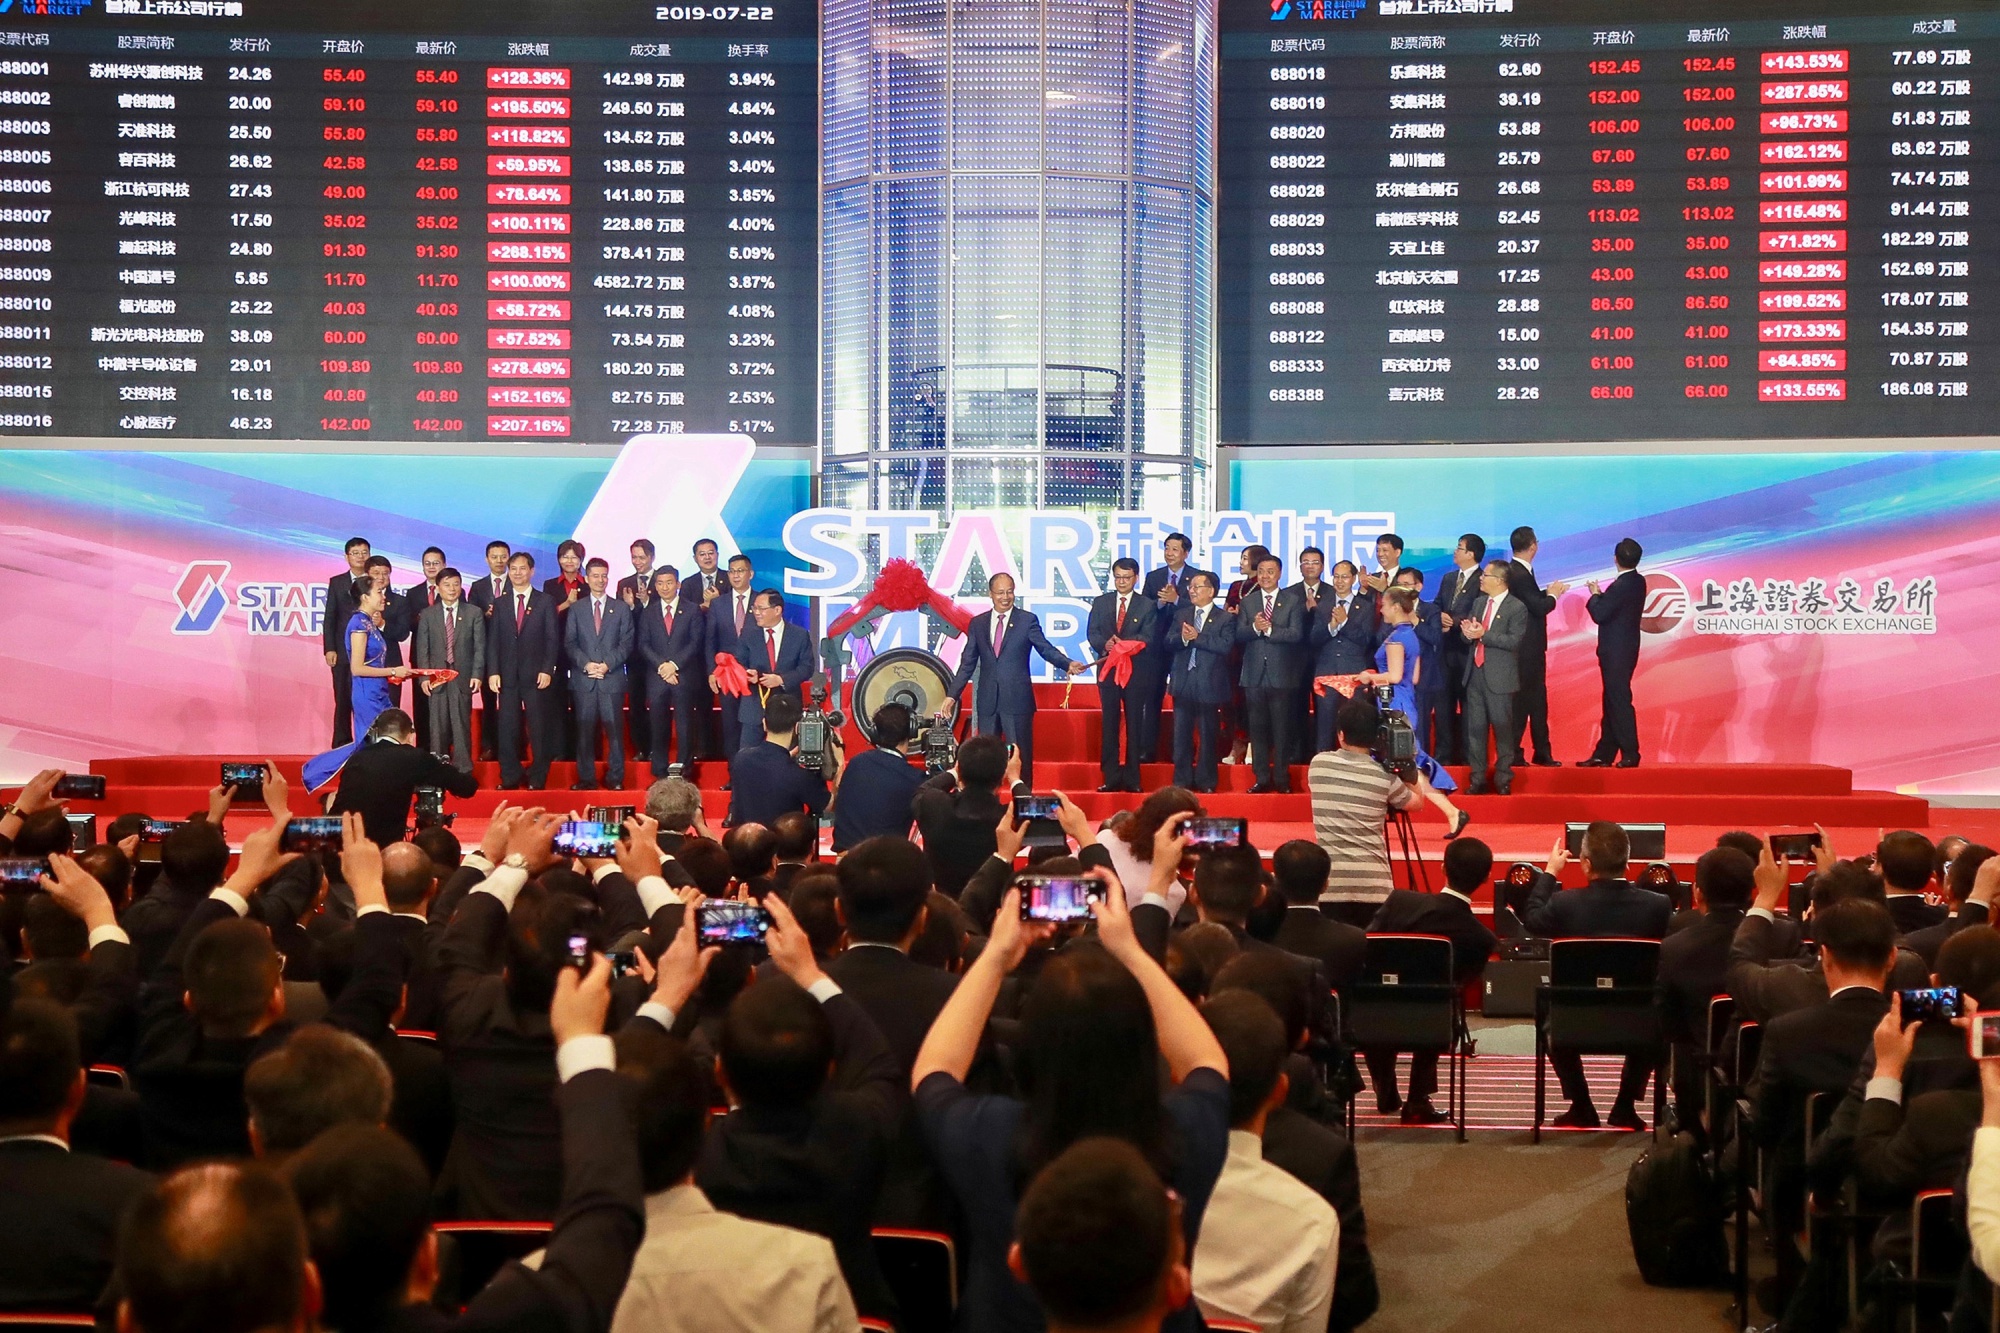 People take photos during an opening ceremony of the Shanghai Stock Exchange's&nbsp;new Star Market on July 22.